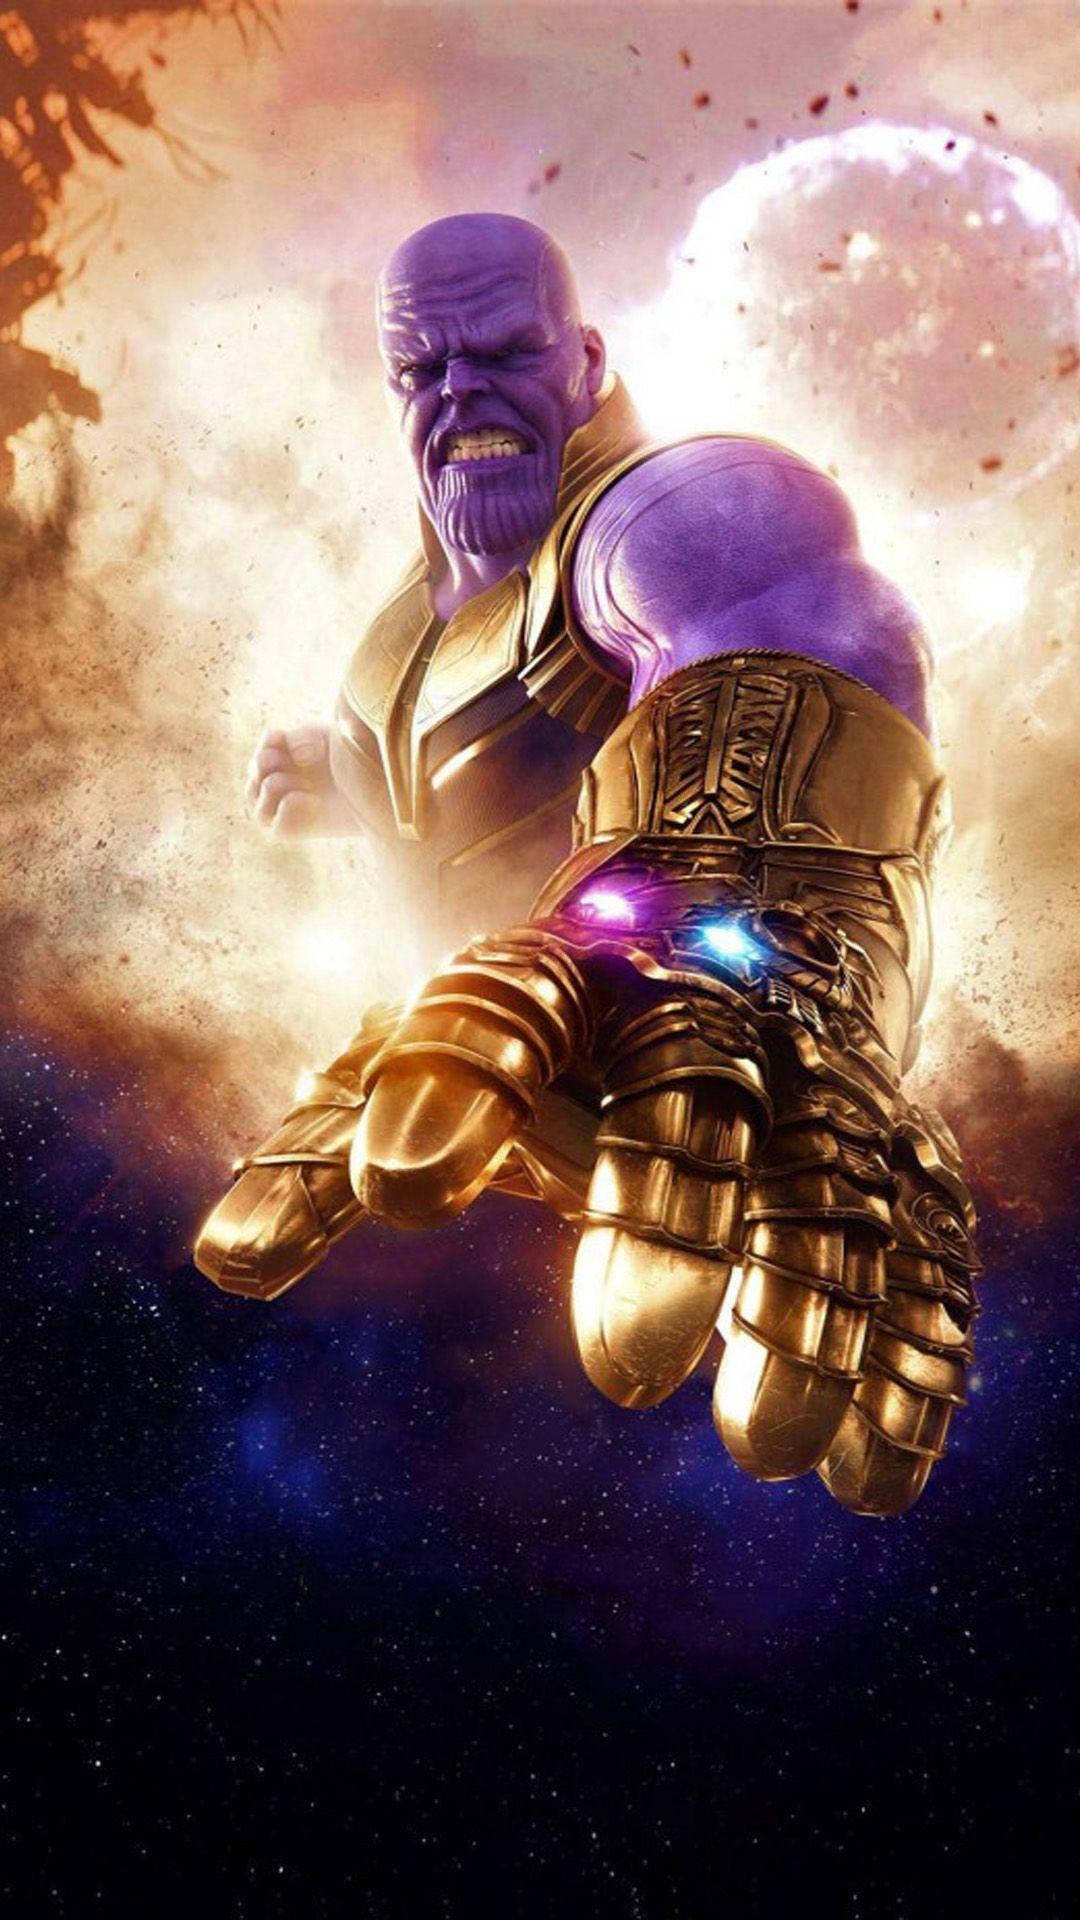 Download Thanos Avengers Infinity War 2018 Free Pure 4K